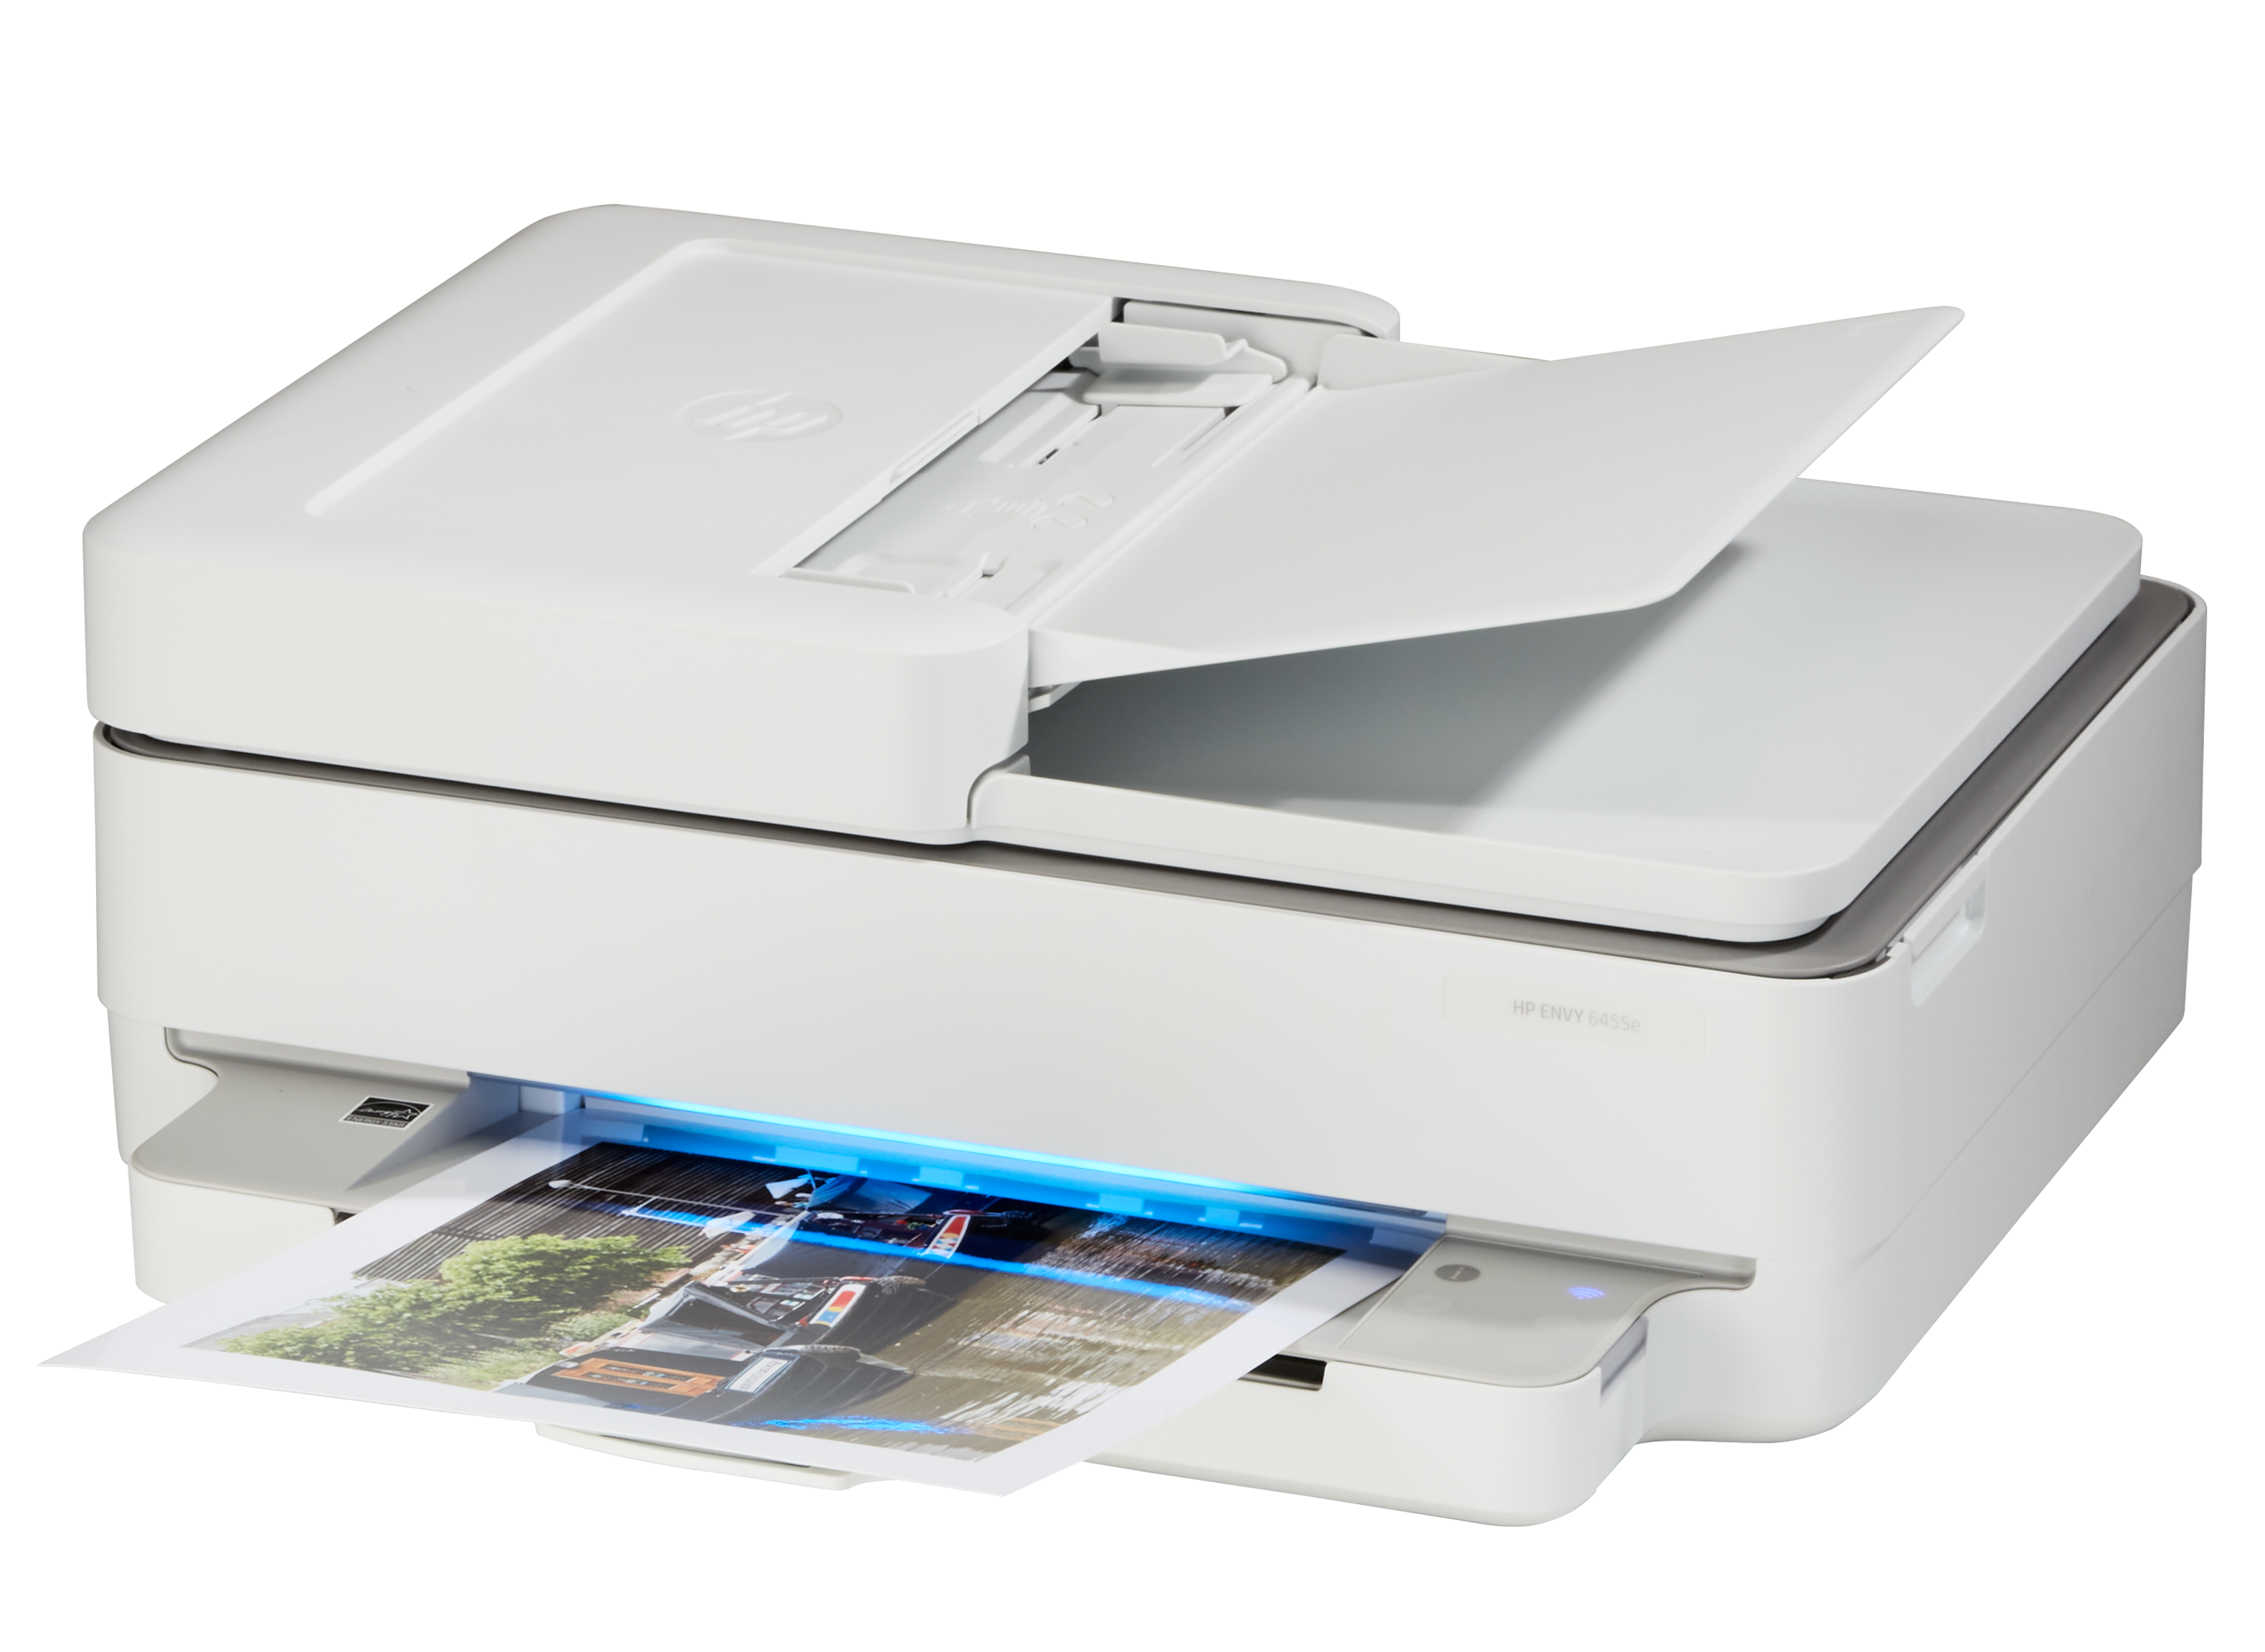 https://crdms.images.consumerreports.org/prod/products/cr/models/404303-all-in-one-inkjet-printers-hp-envy-6455e-10023490.png